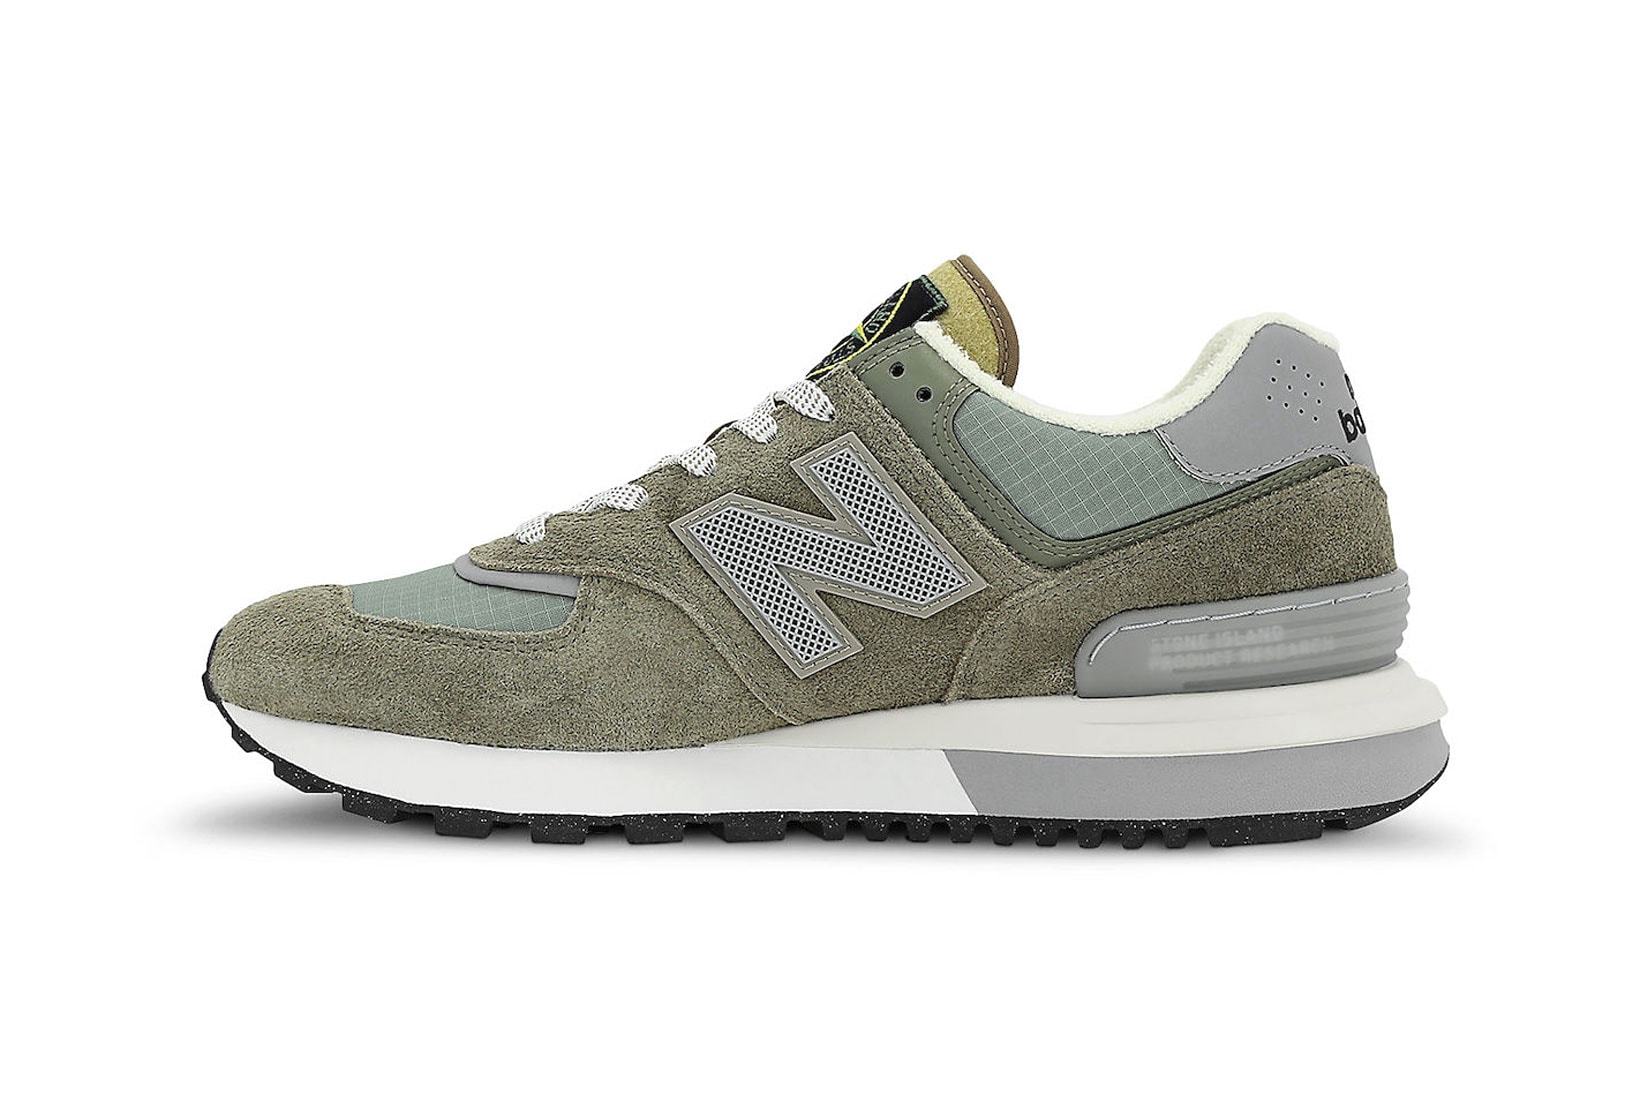 Stone Island New Balance 574 Collaboration Images RElease Info